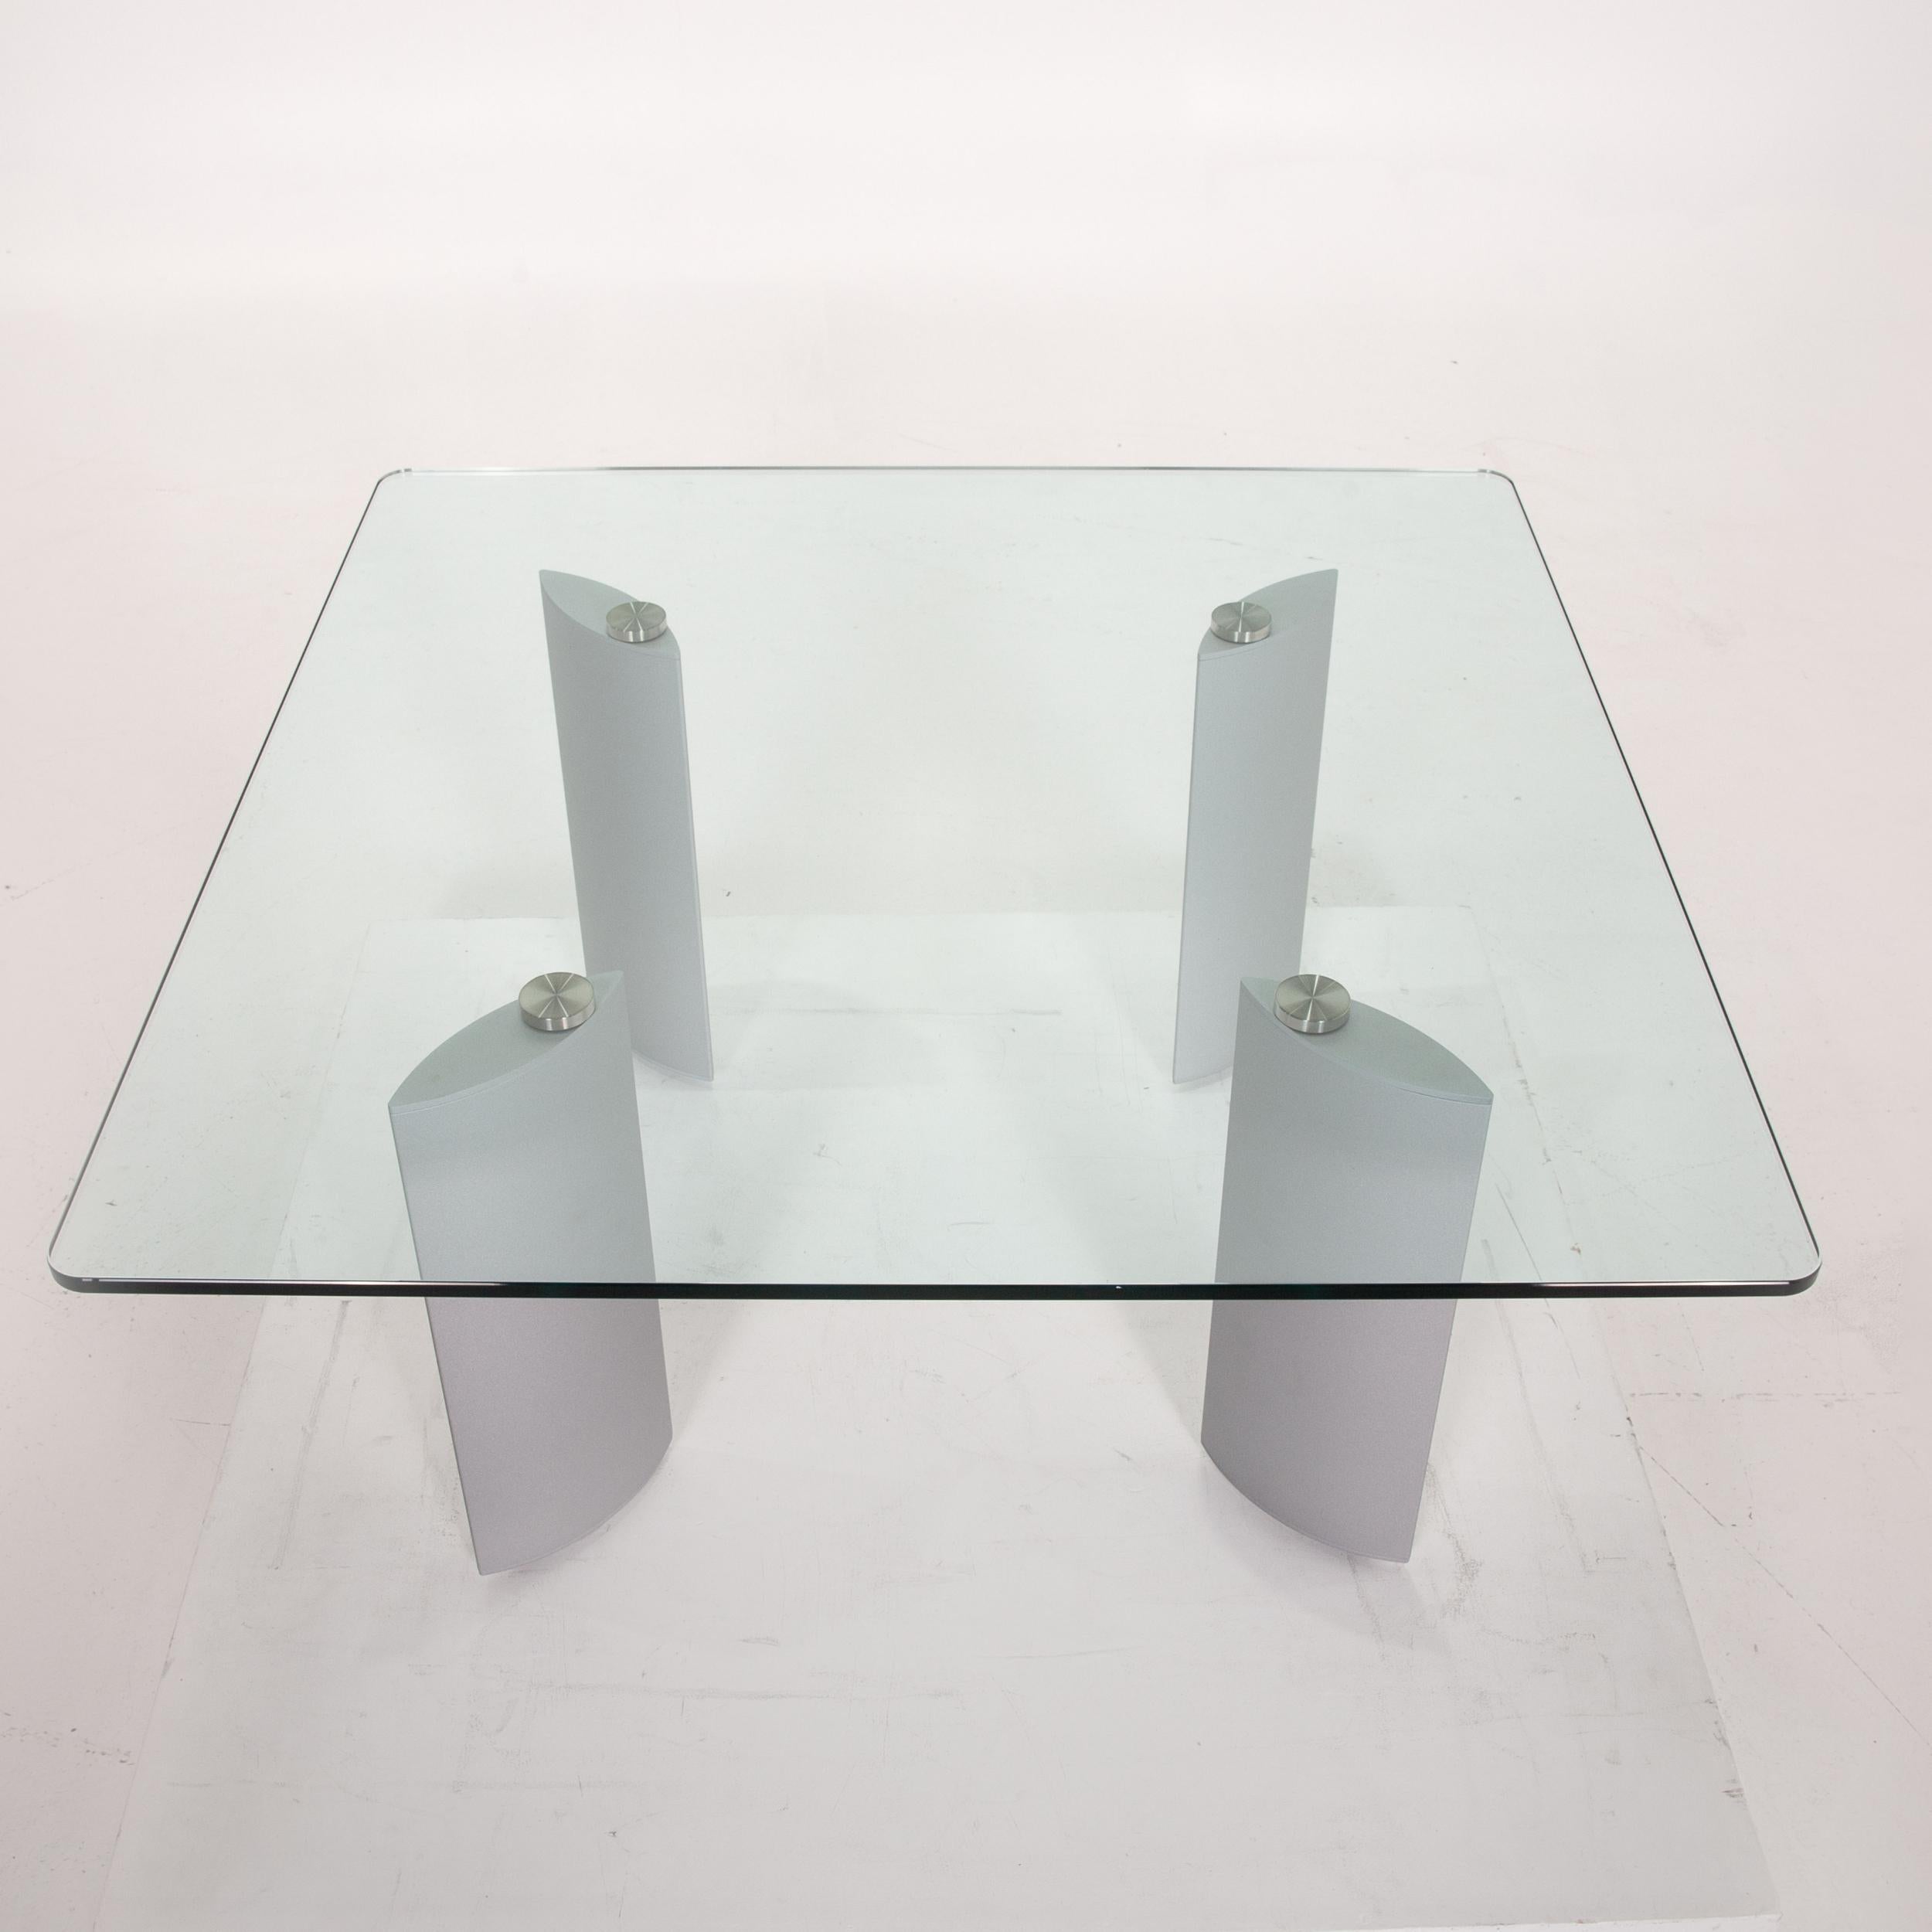 Ronald Schmitt K285 Glass Coffee Table Function In Good Condition For Sale In Cologne, DE